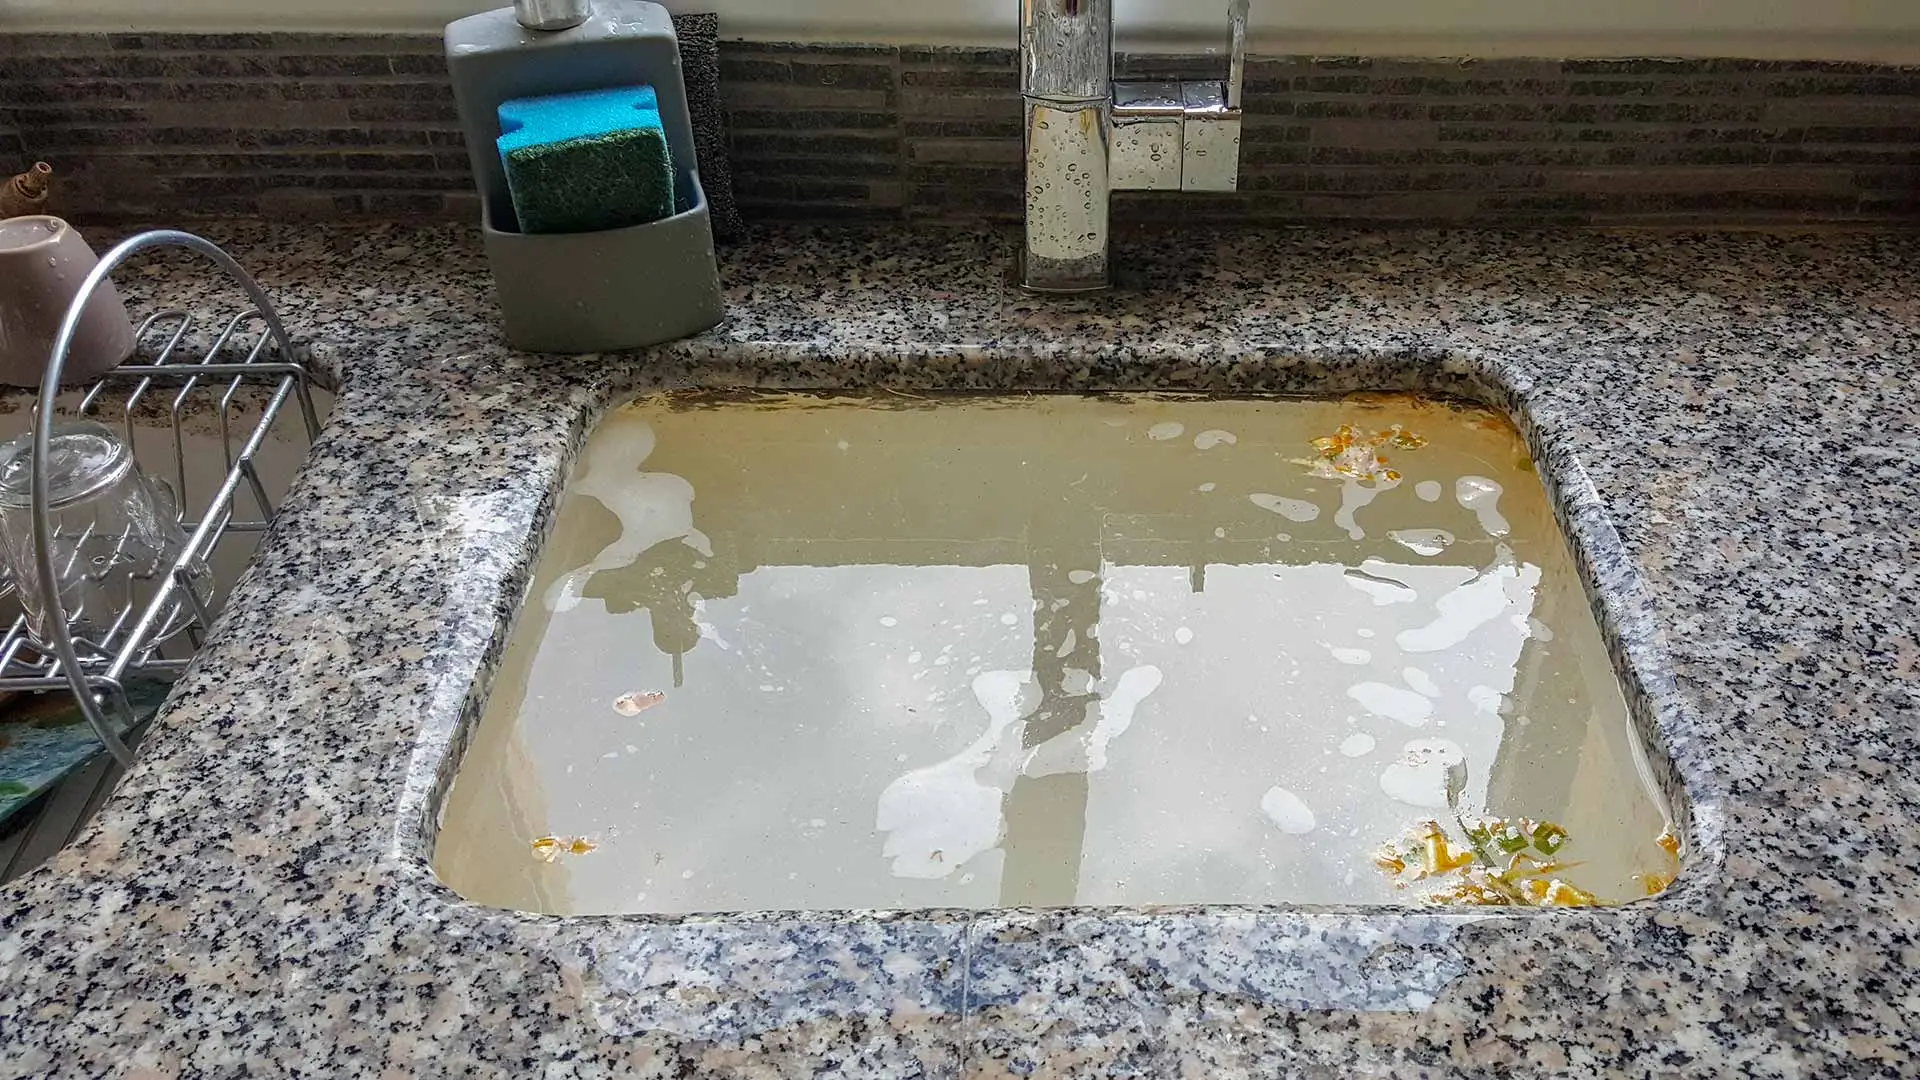 Clogged kitchen sink drain at a Wesley Chapel, FL home.